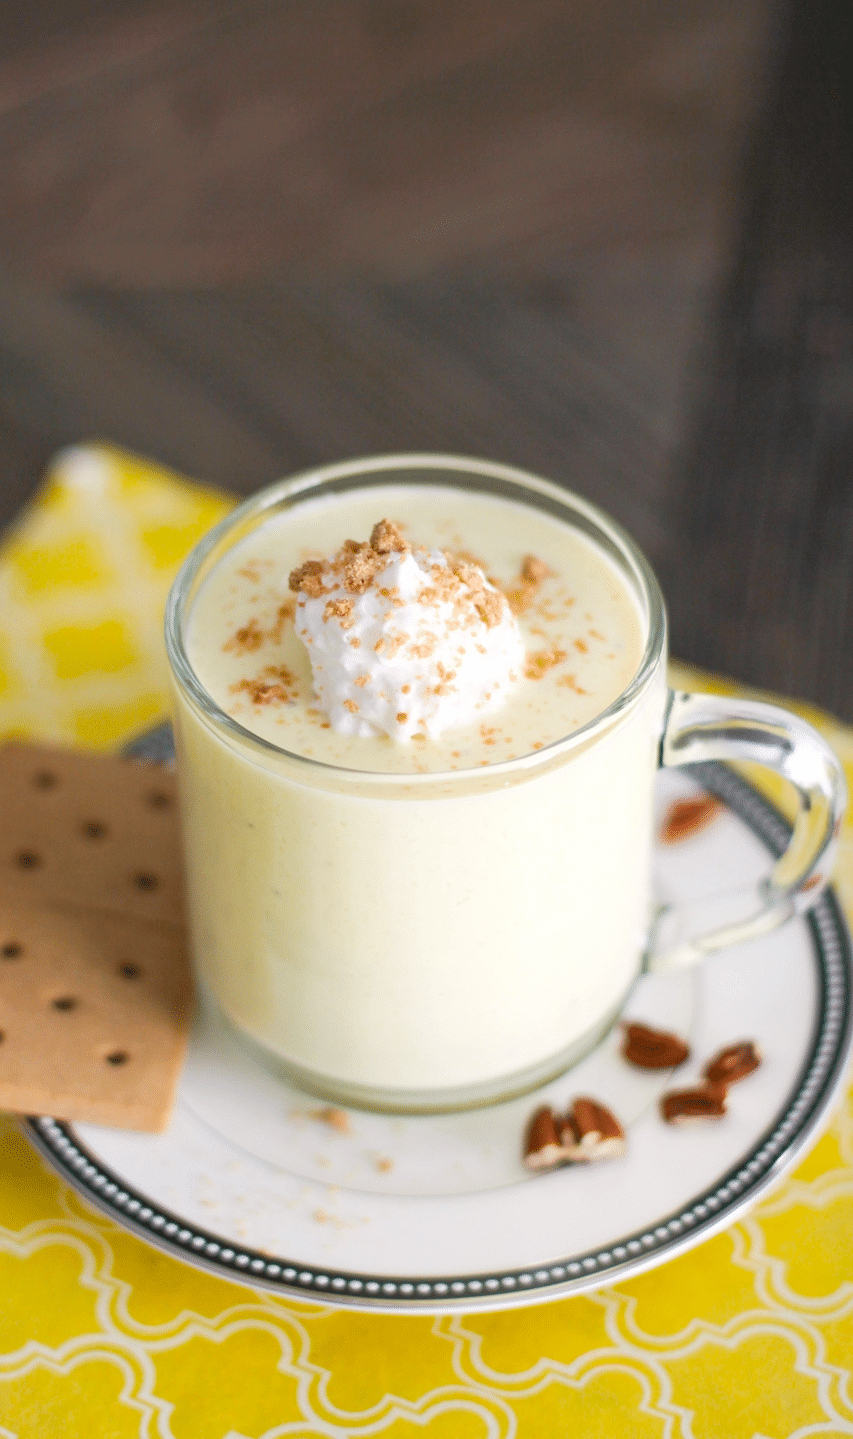 This Healthy Banana Cream Pie Milkshake tastes like banana cream pie in smoothie form. It's so sweet and creamy, you'd never know it's low fat! -- Healthy Dessert Recipes at the Desserts With Benefits Blog